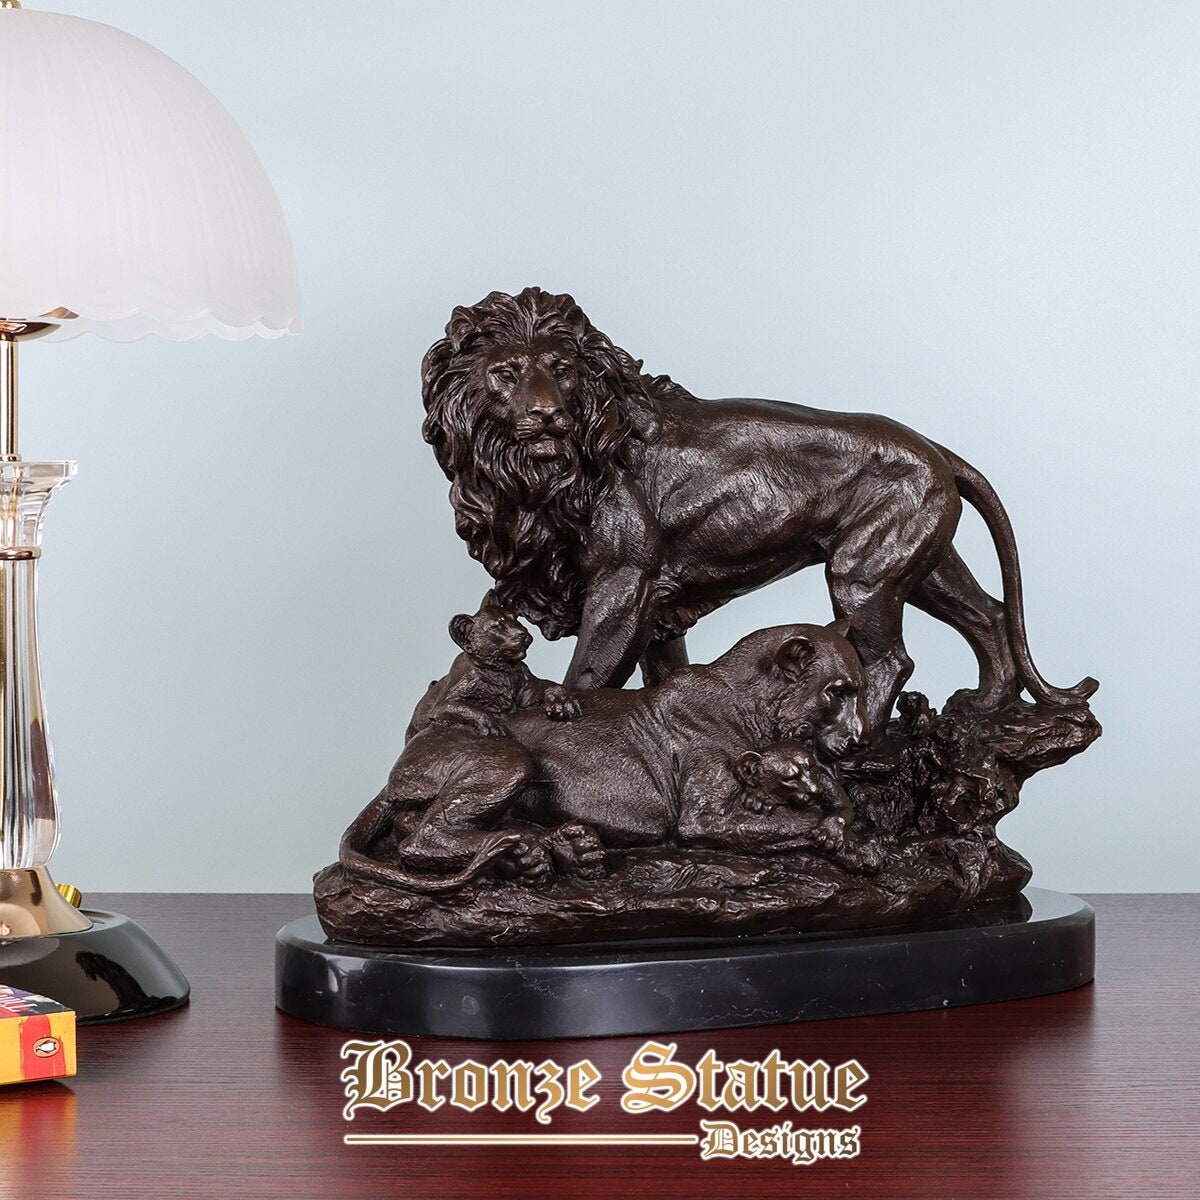 Lion family real bronze statue love wild animal sculpture wildlife art home office table decoration gift large